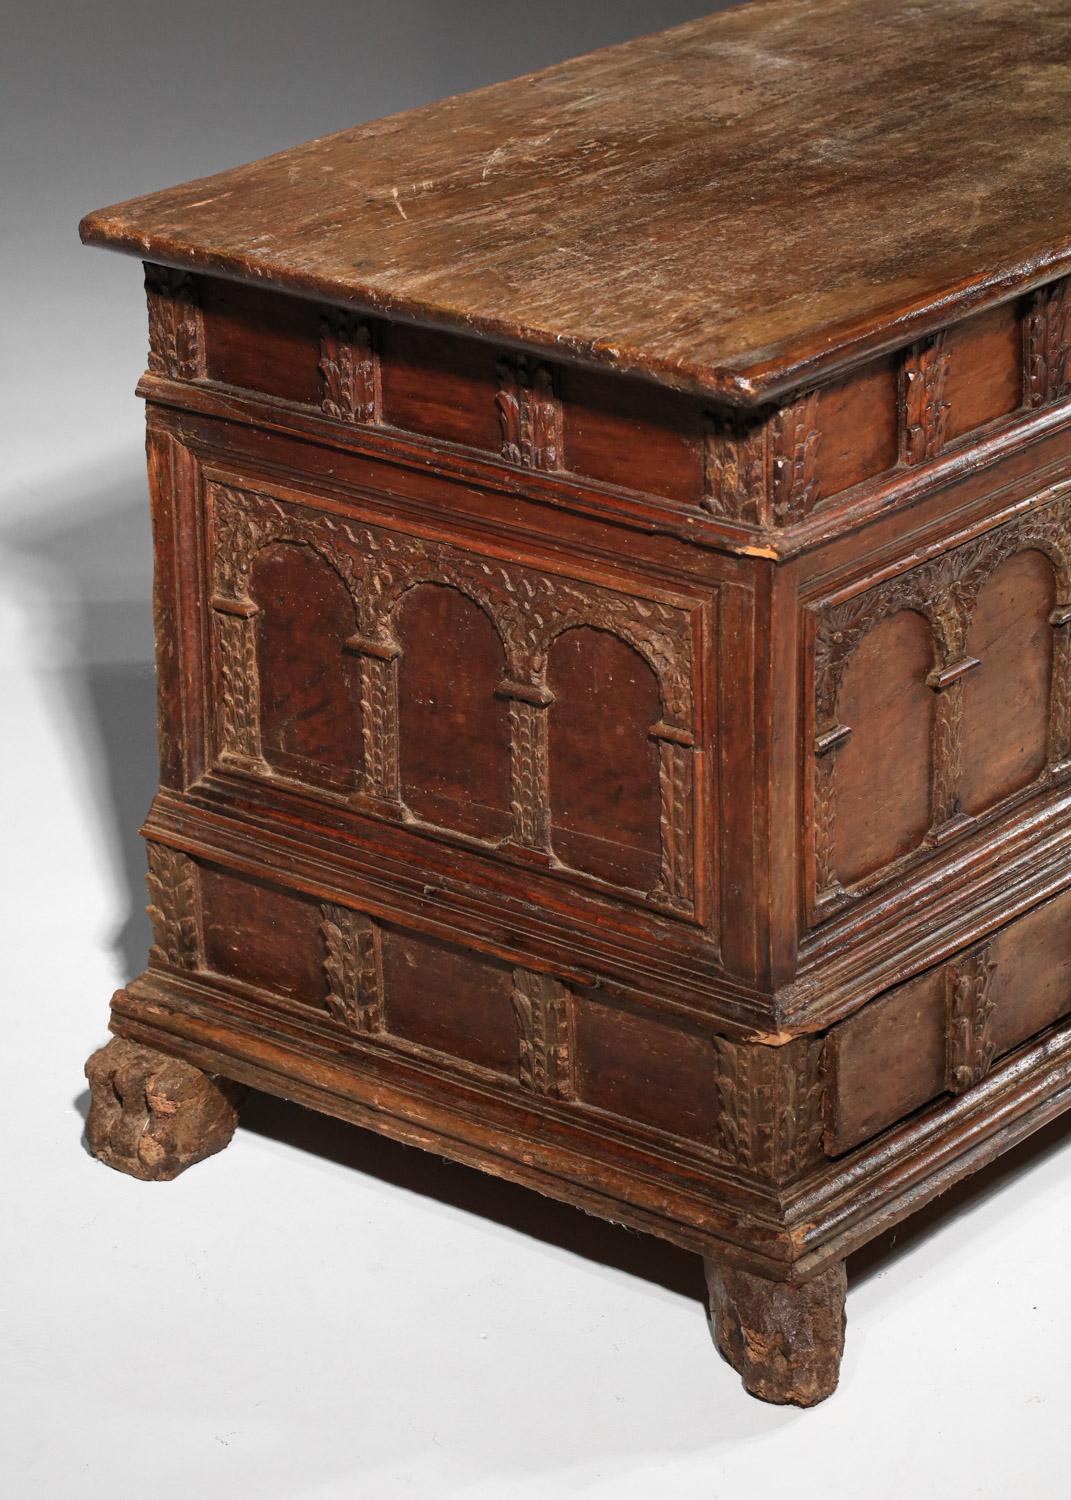 17th century Spanish or Italian carved solid wood chest For Sale 7